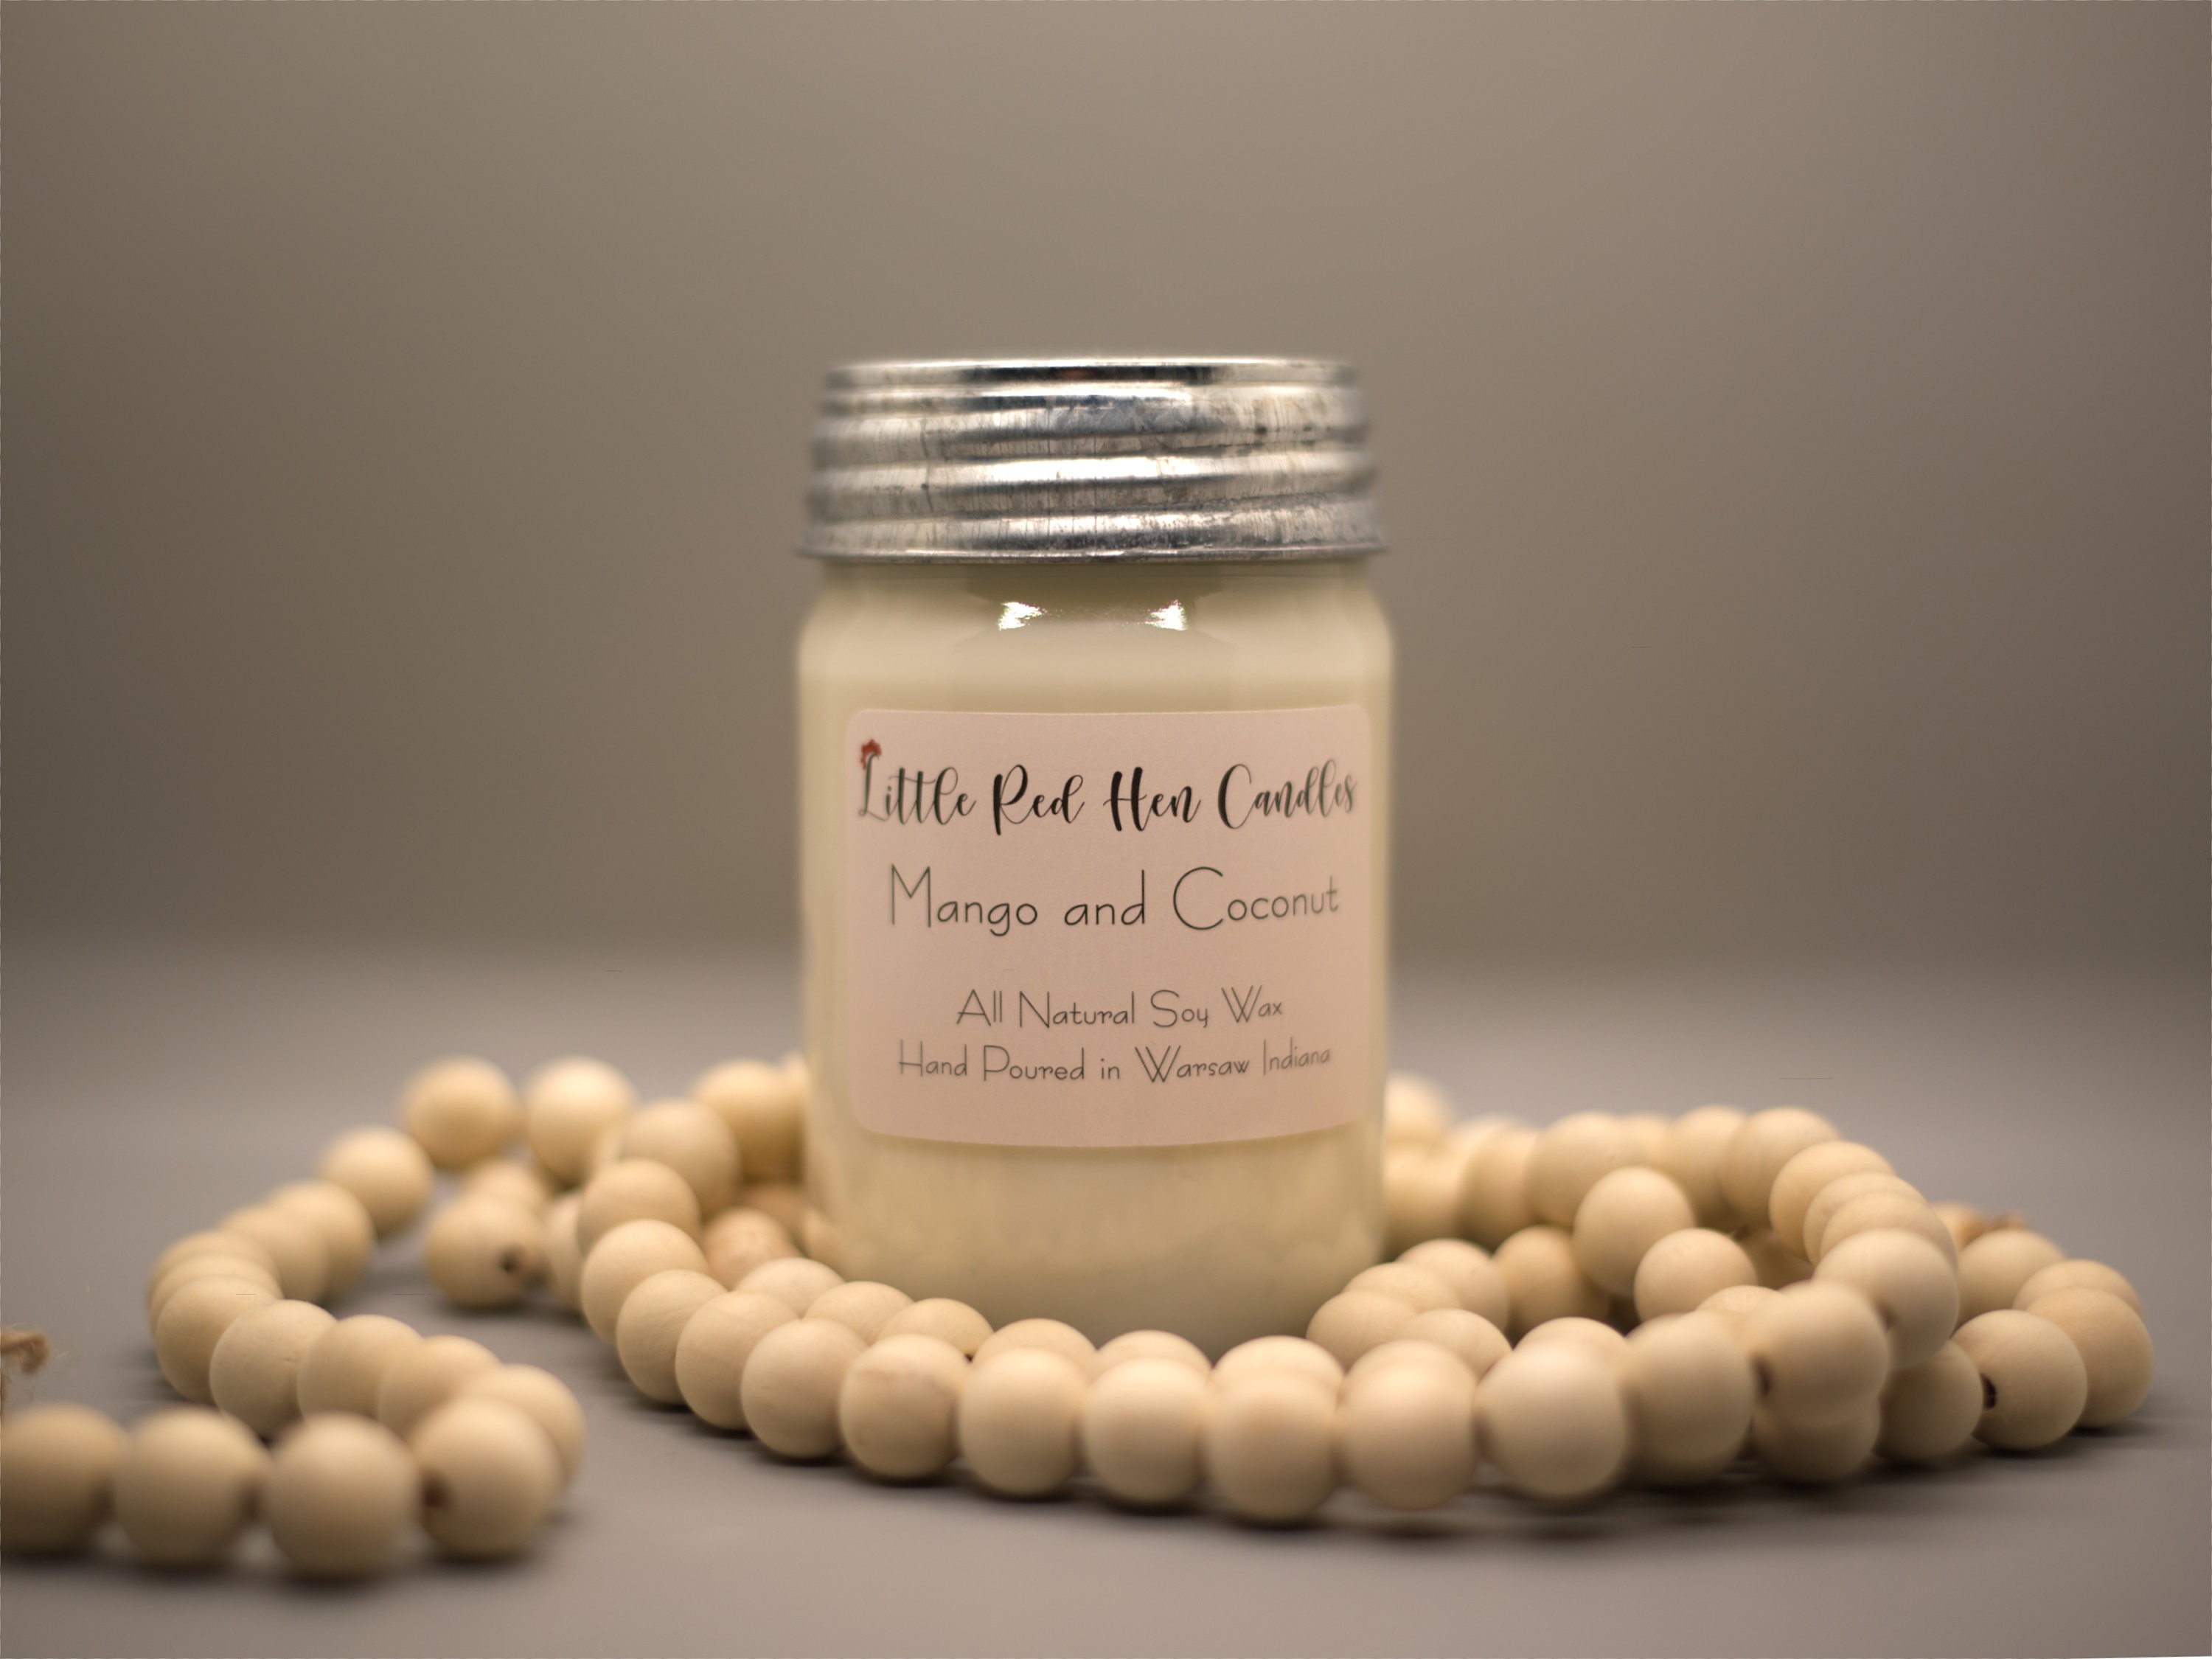 Pure Soy Wax Candles / Candles / Soy Candles / Balsam Fir & 60+ Scents / 12  oz Mason Jar Candle / Made in VT / Making Scents Organics